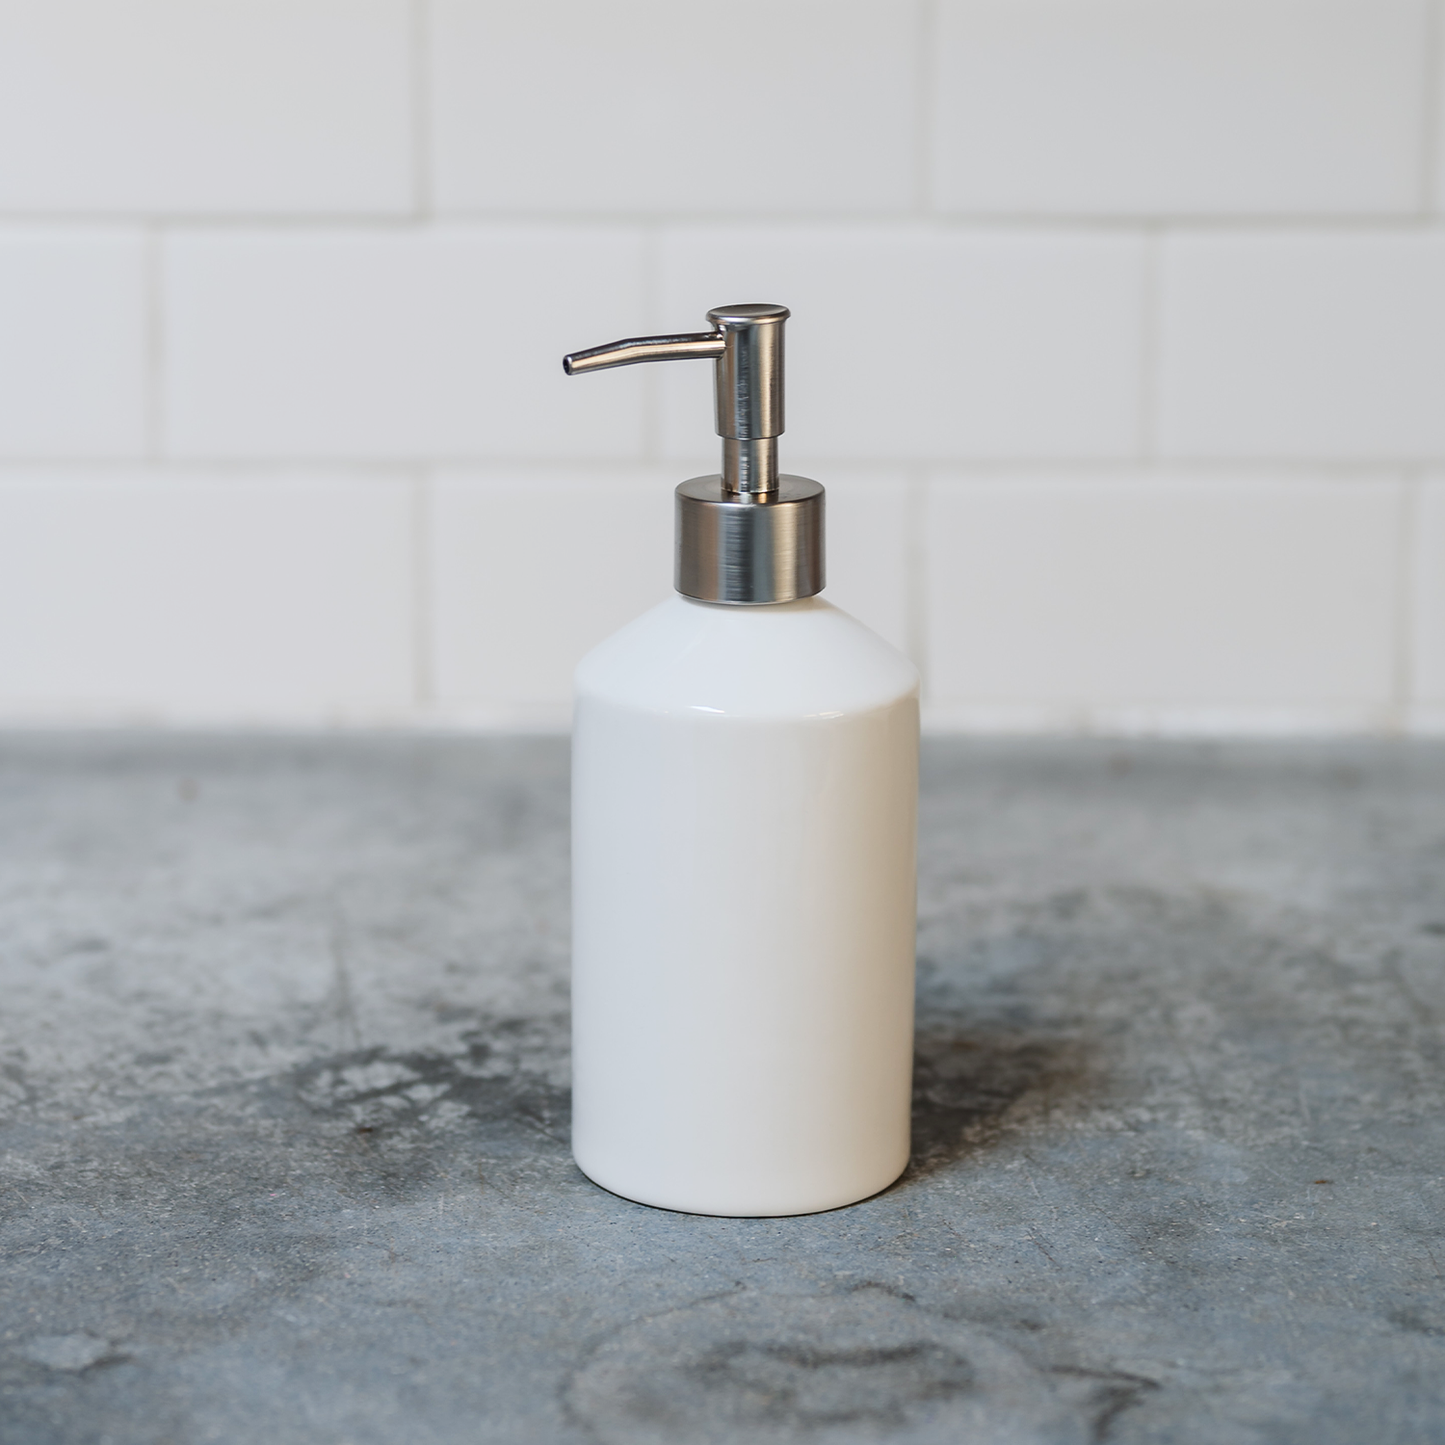 15 Fluid-Ounce Soap Dispenser with Brushed Nickel Pump